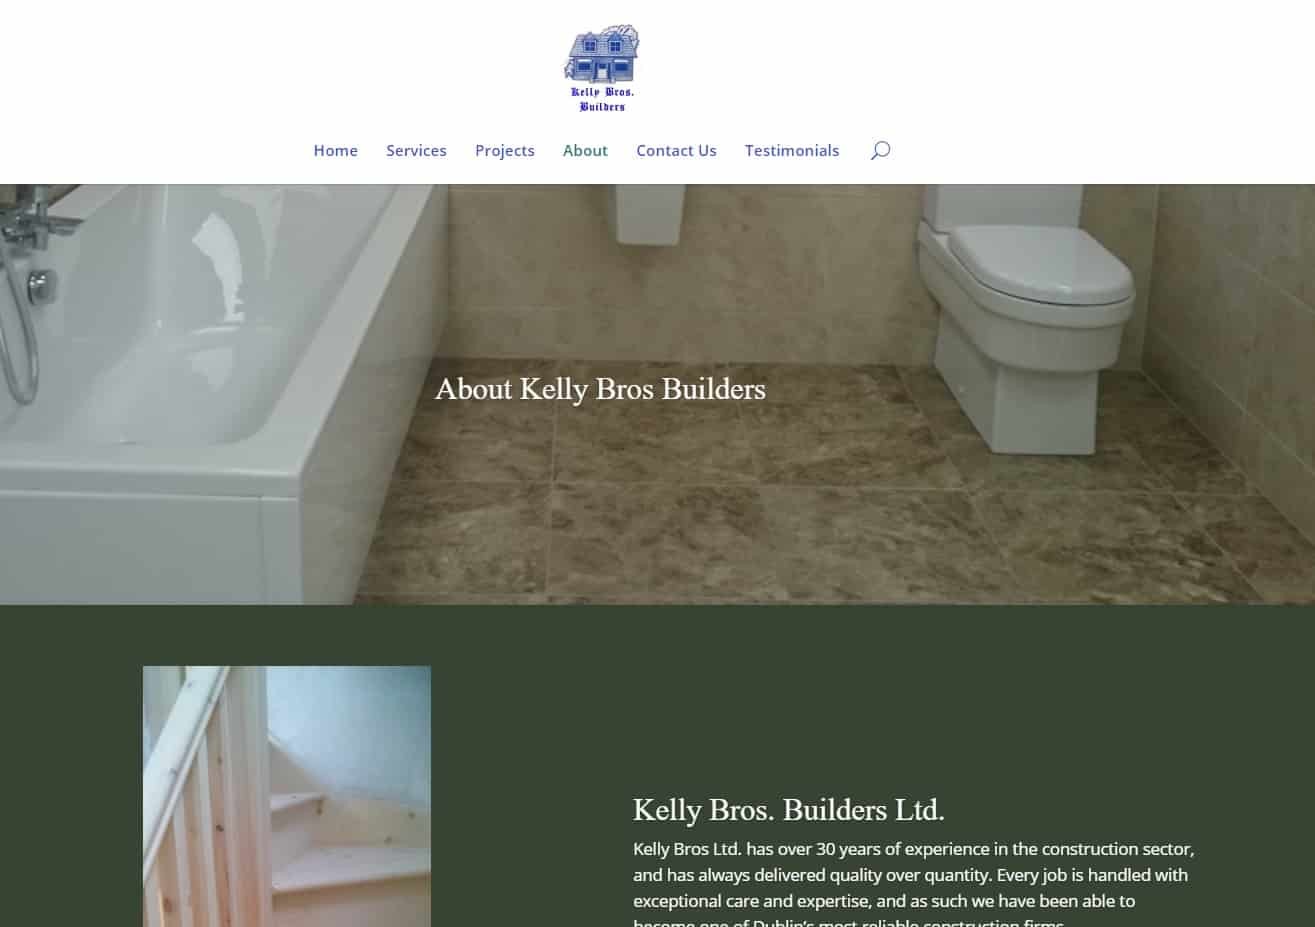 Web Design for Builders Screenshot: Services Page